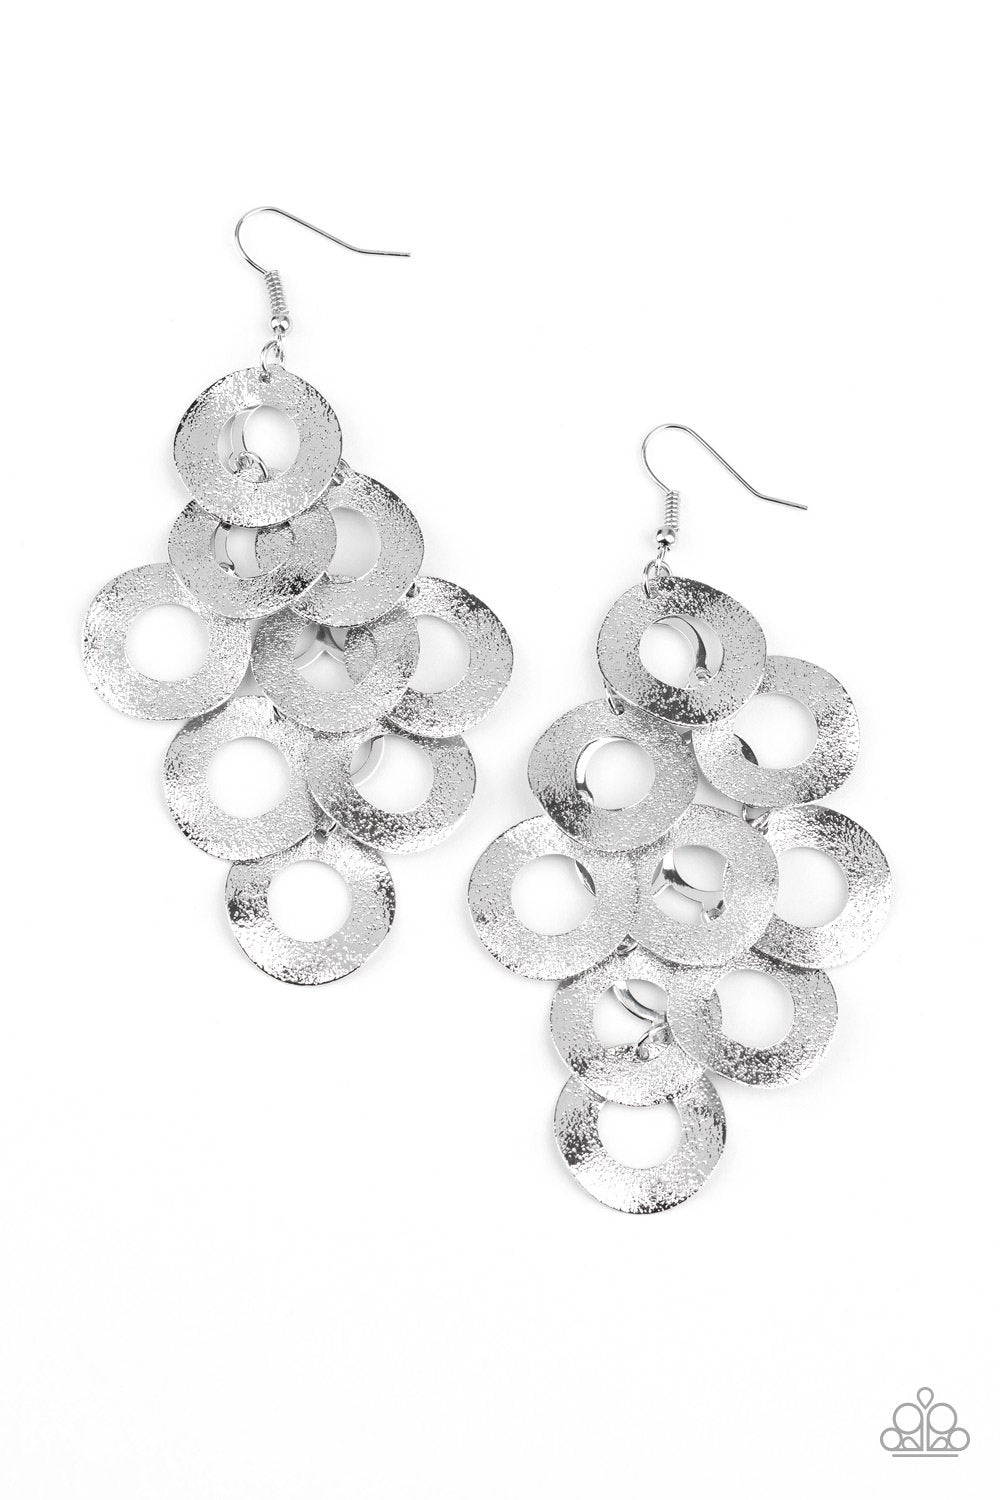 Scattered Shimmer Silver Cascading Hoop Earrings - Paparazzi Accessories - lightbox -CarasShop.com - $5 Jewelry by Cara Jewels